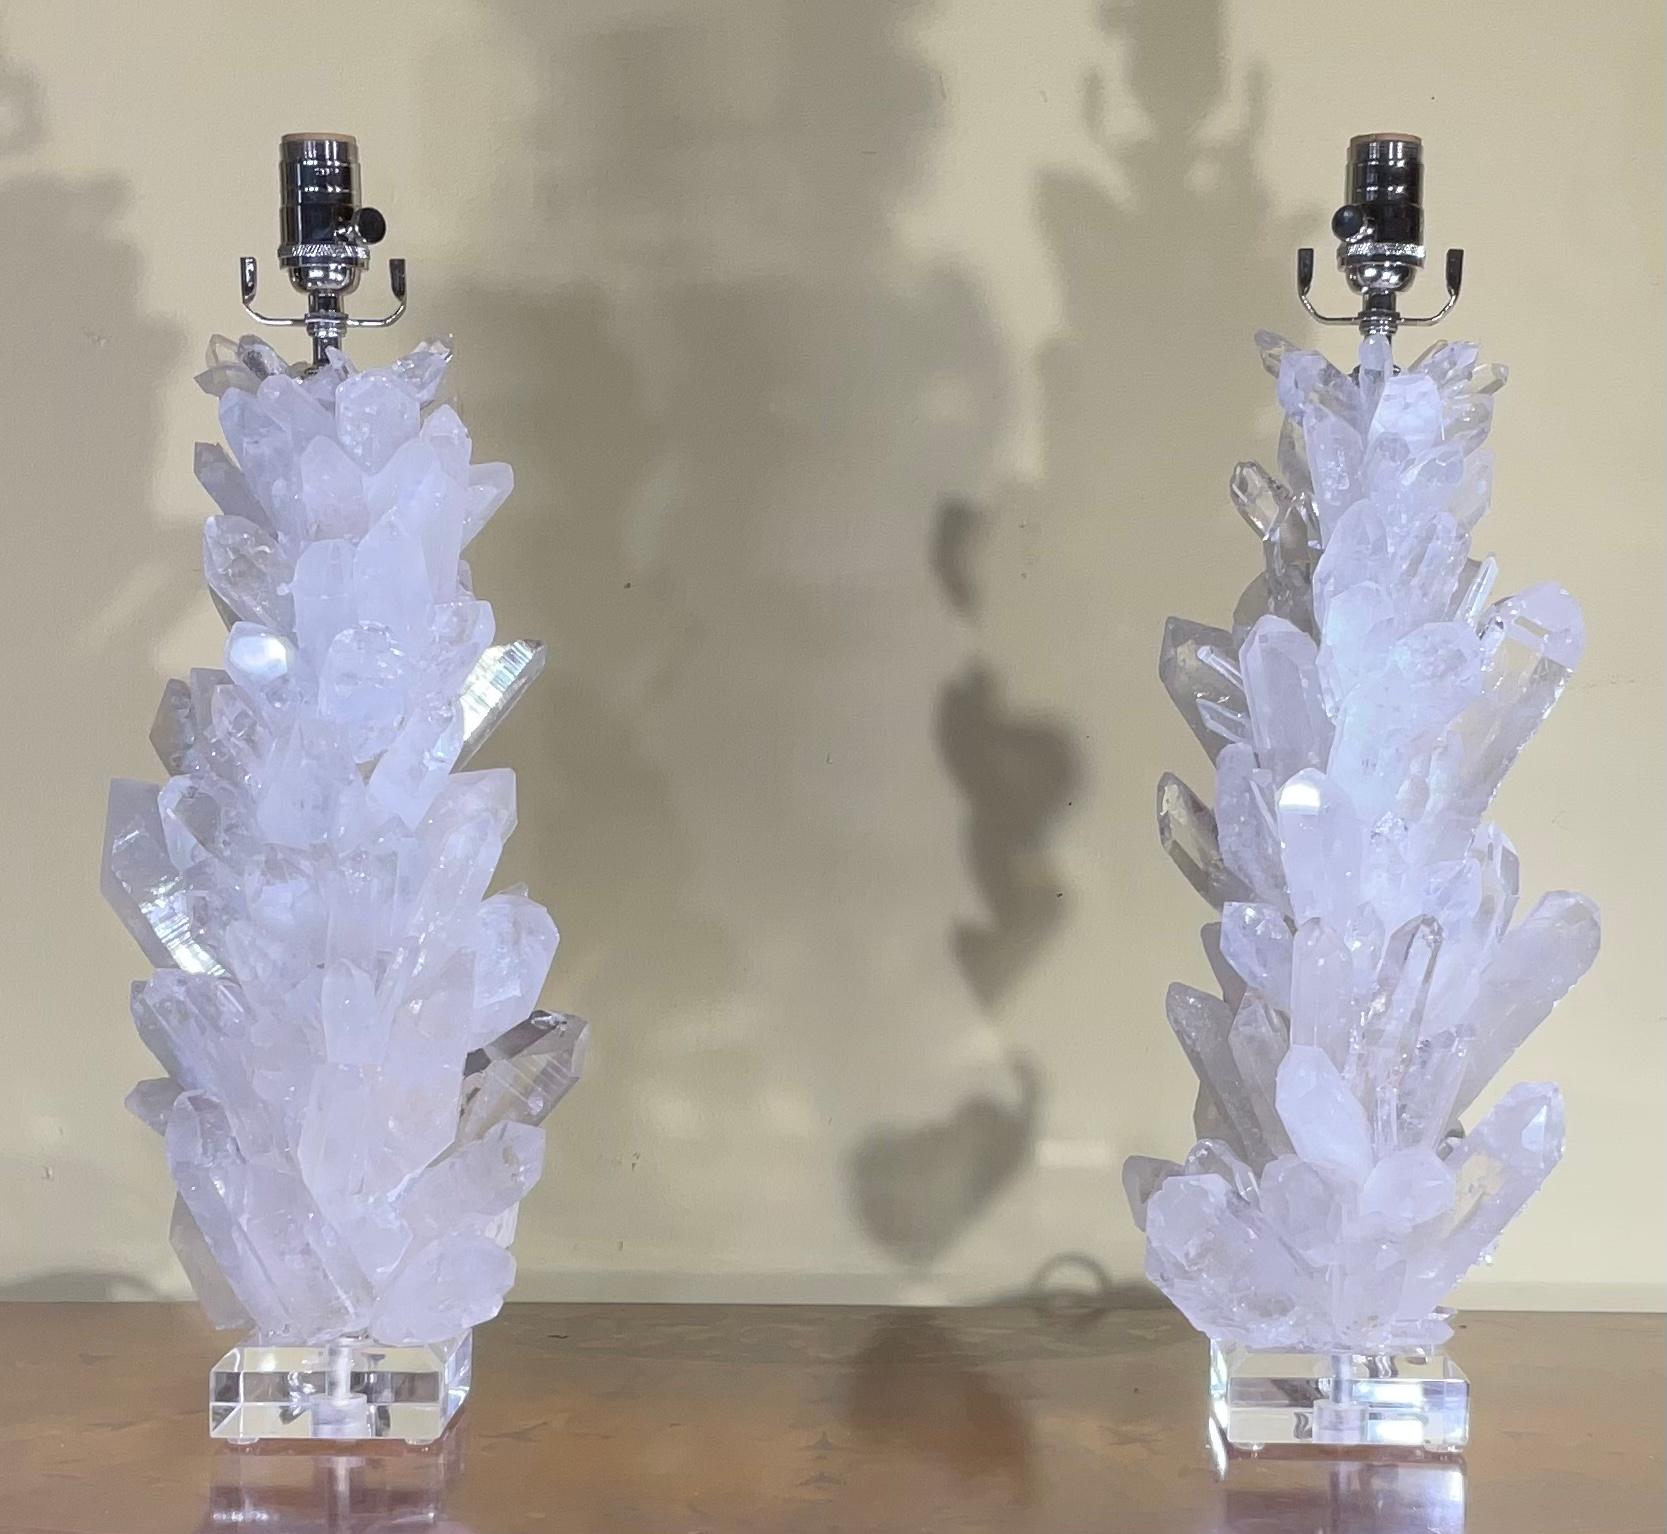 One of a kind pair of table lamps made of genuine crystal quartz shards and crystal points in white colors ,artistically put together to make beautiful and impressive pieces of object of art for display.
Bevelled clear Lucite base, size: 4”x 4”